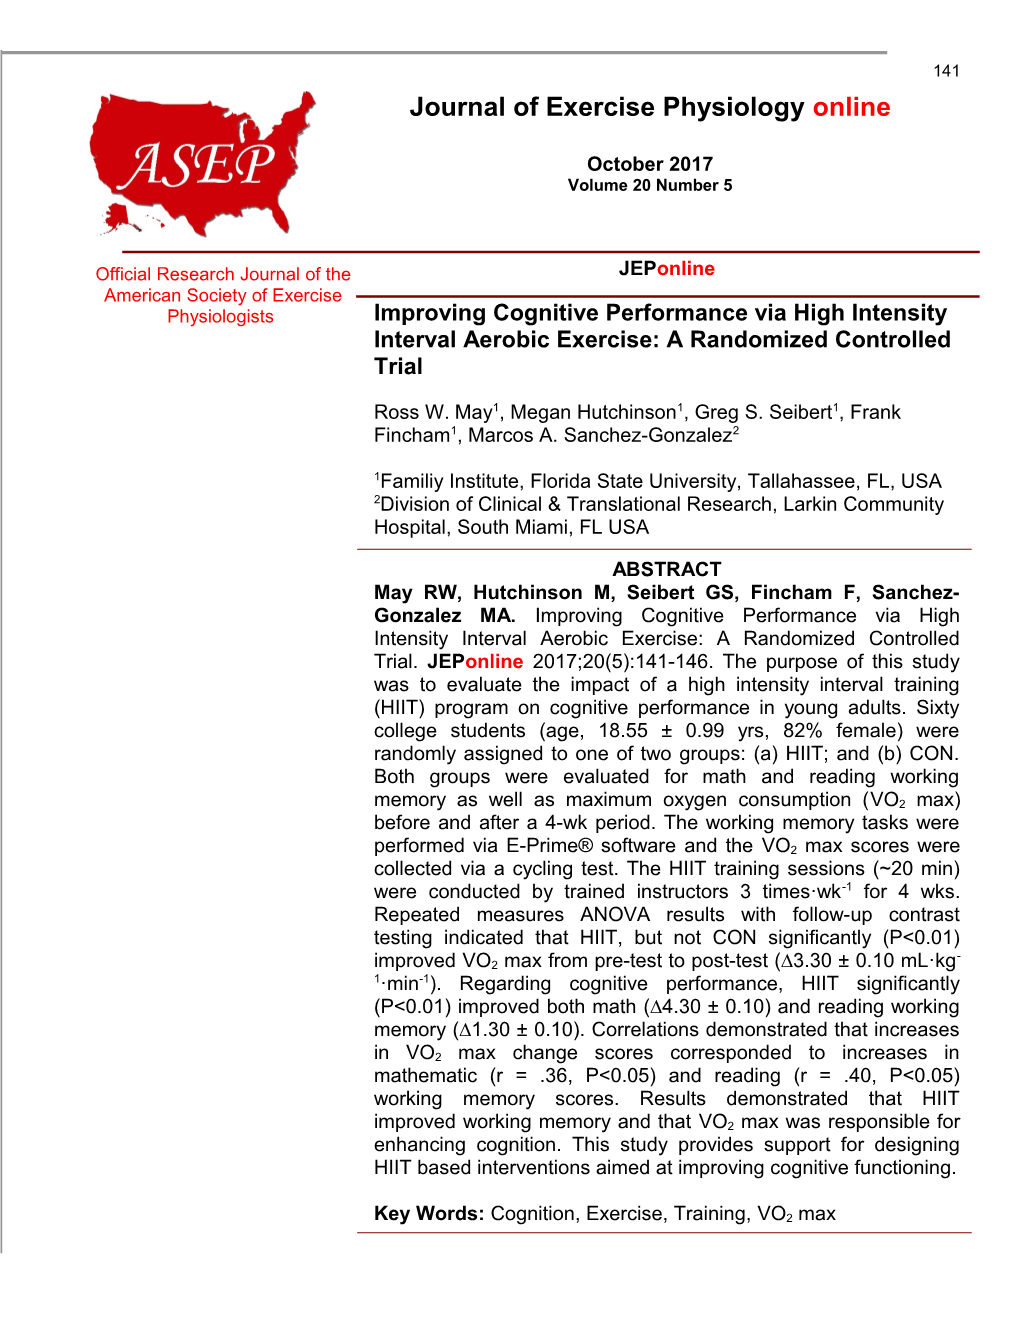 Improving Cognitive Performance Via High Intensity Interval Aerobic Exercise: a Randomized